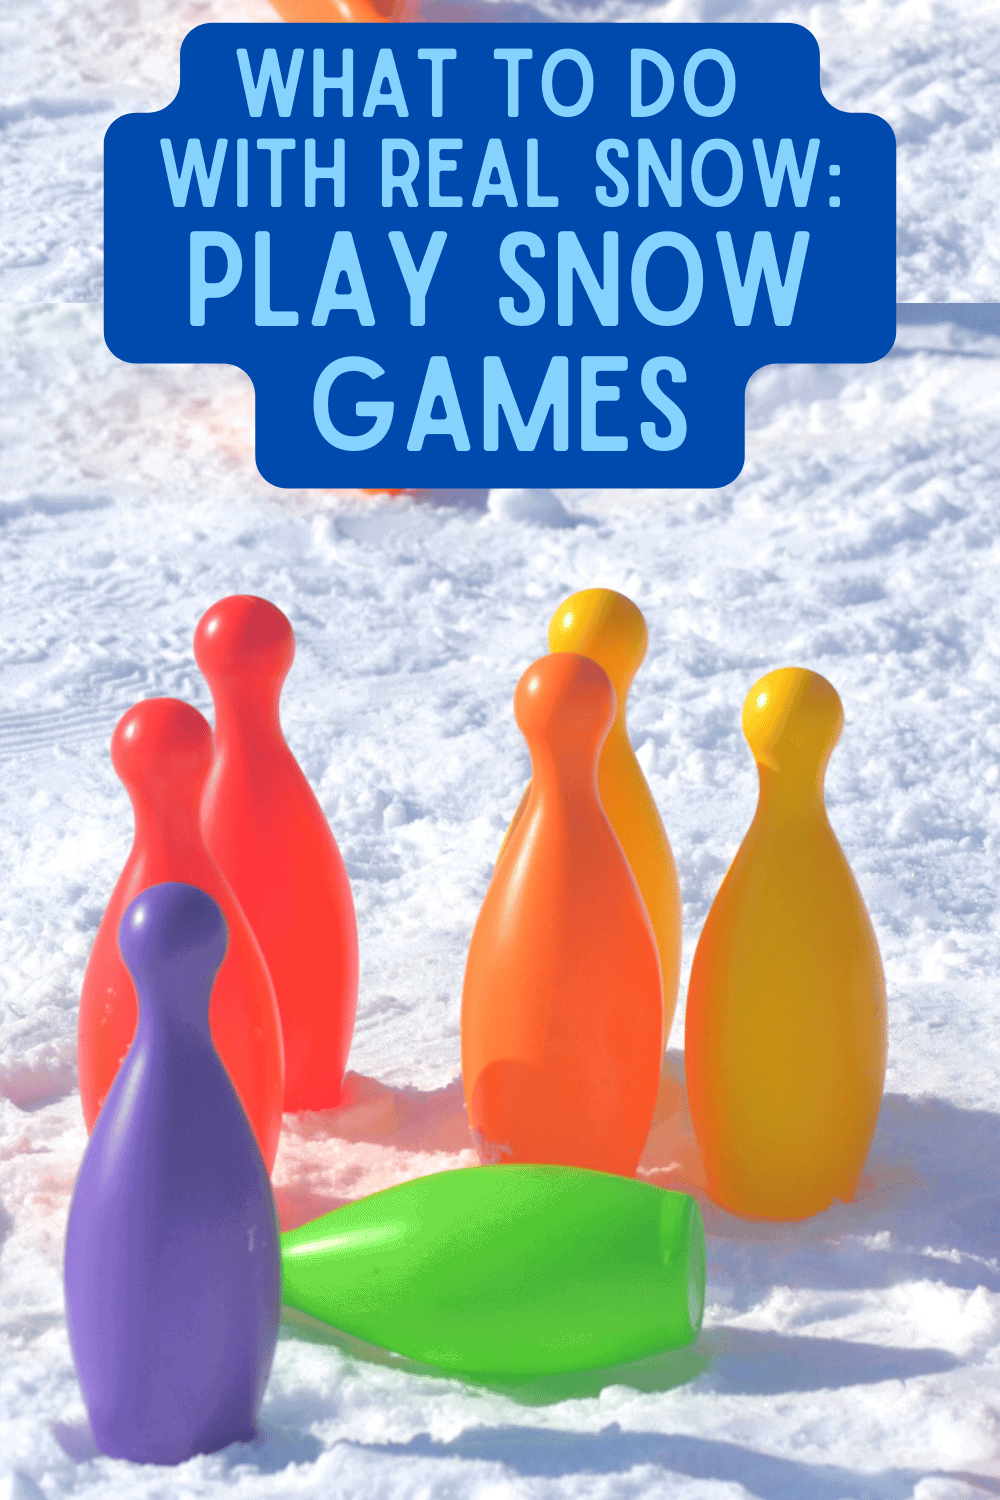 what to make with real snow play snow games text over image of snow bowling